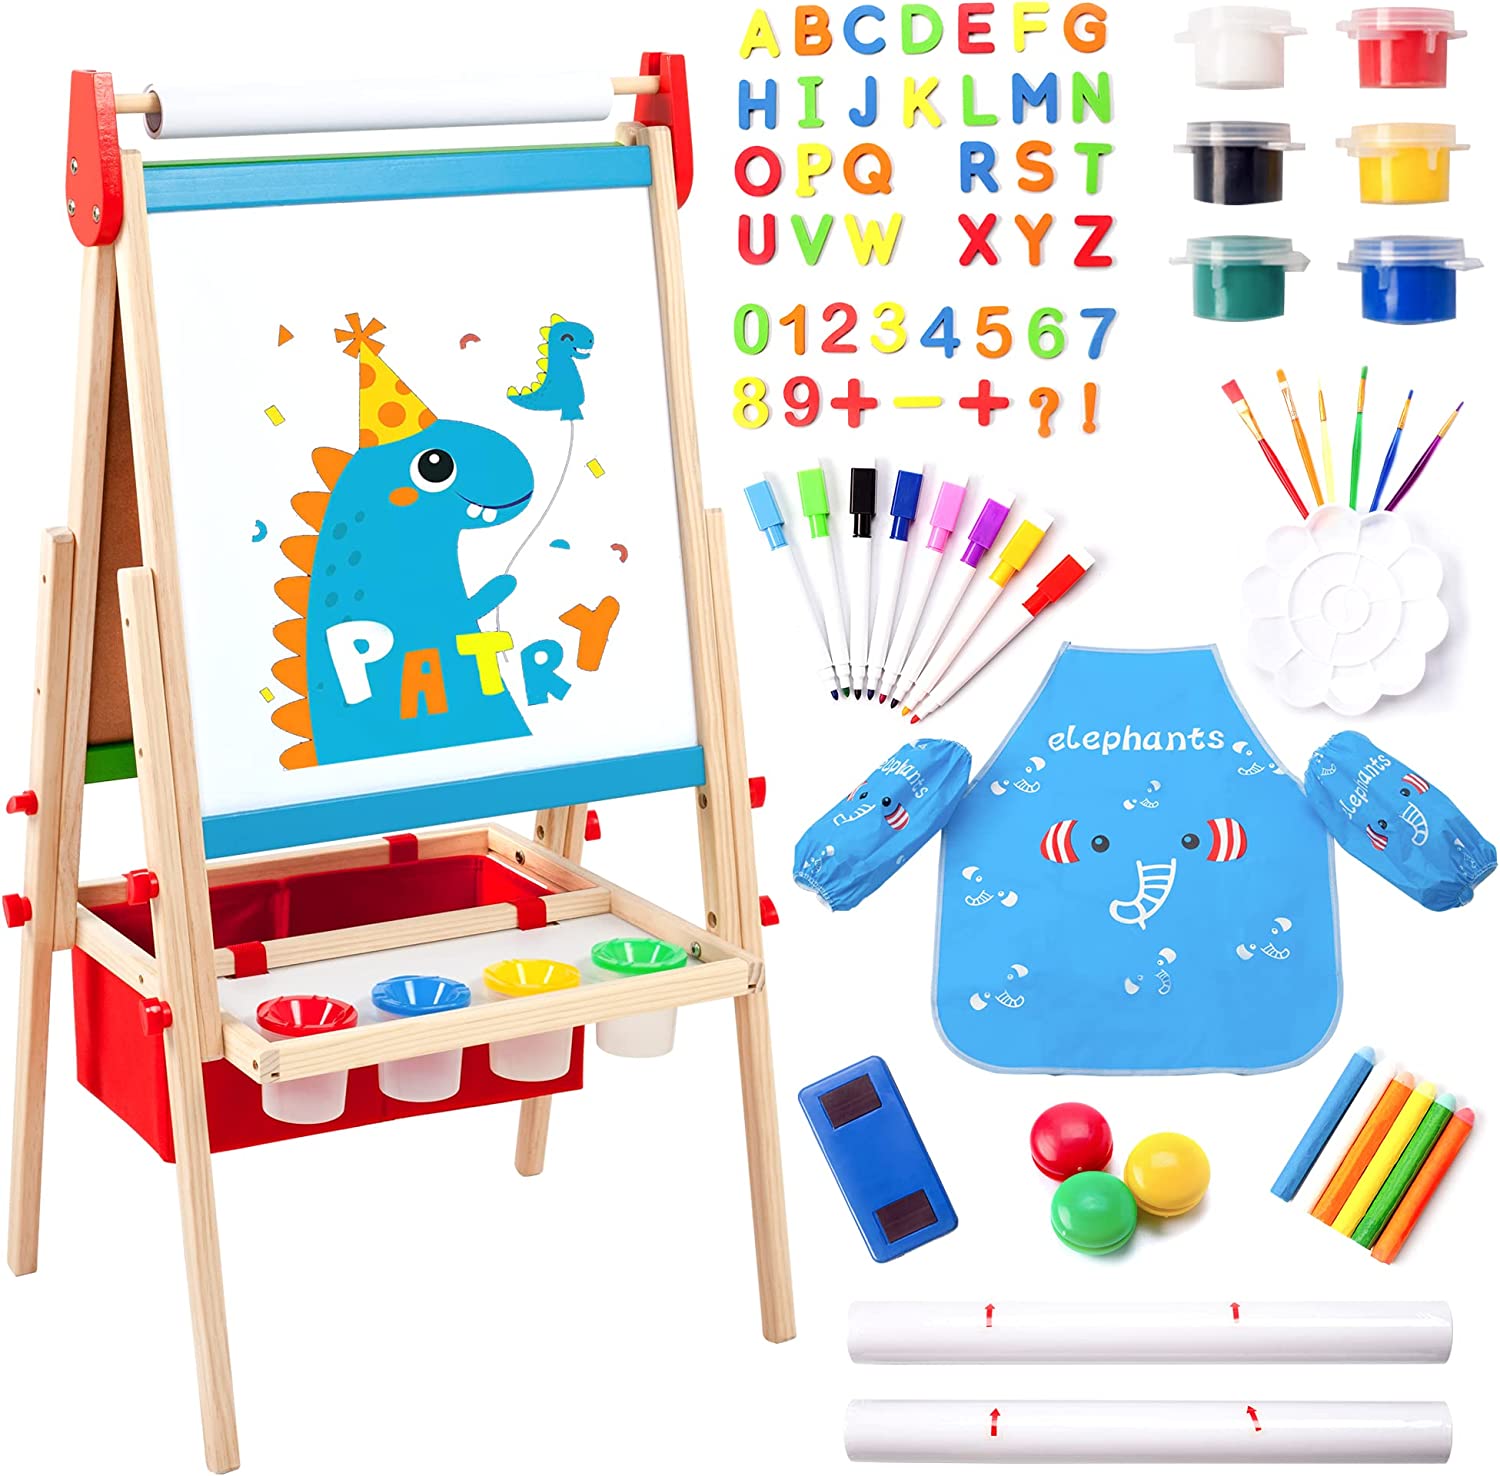 2-in-1 Kids Wooden Art Table and Art Easel Set with Chairs Storage Bins  Paper Roll